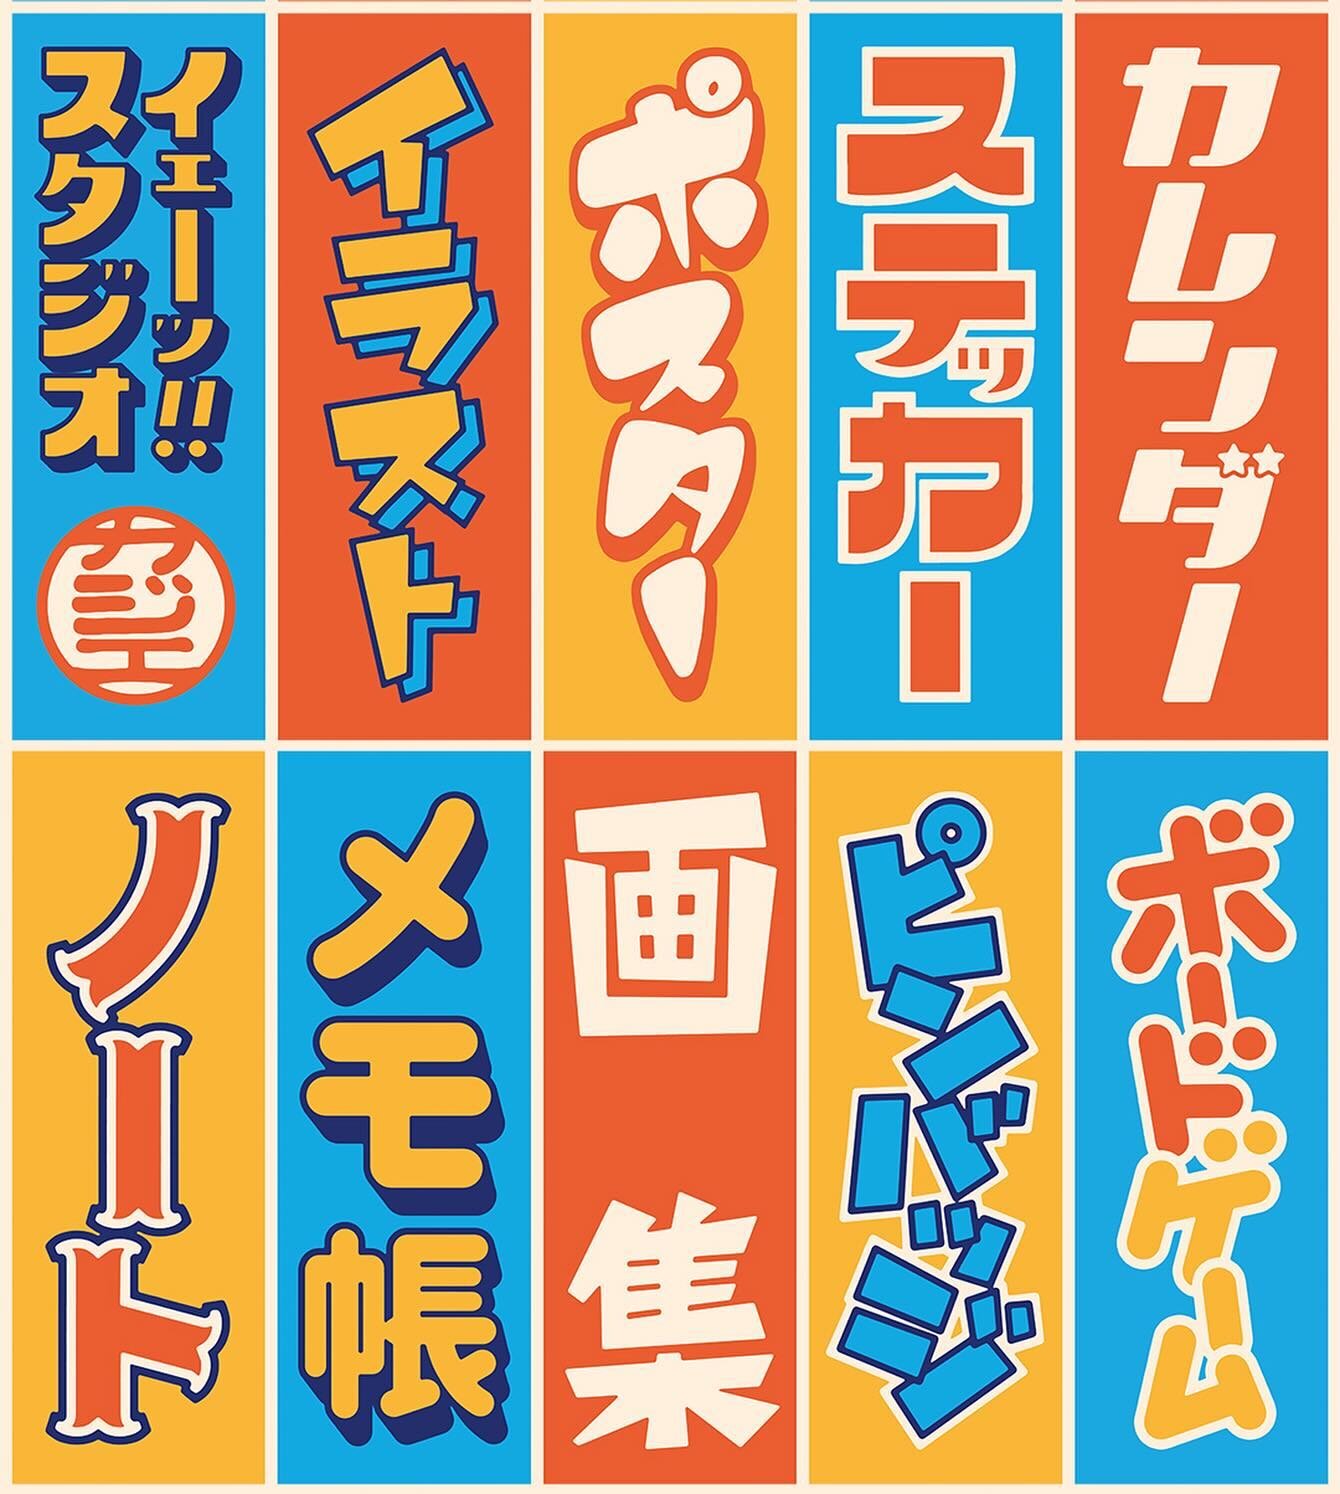 It's no secret that I LOVE designing Japanese typography. ❤️
The first slide shows type work that I've done recently for the decoration of my booth at conventions and markets.
The other slides are a compilation of past works. I've included translatio